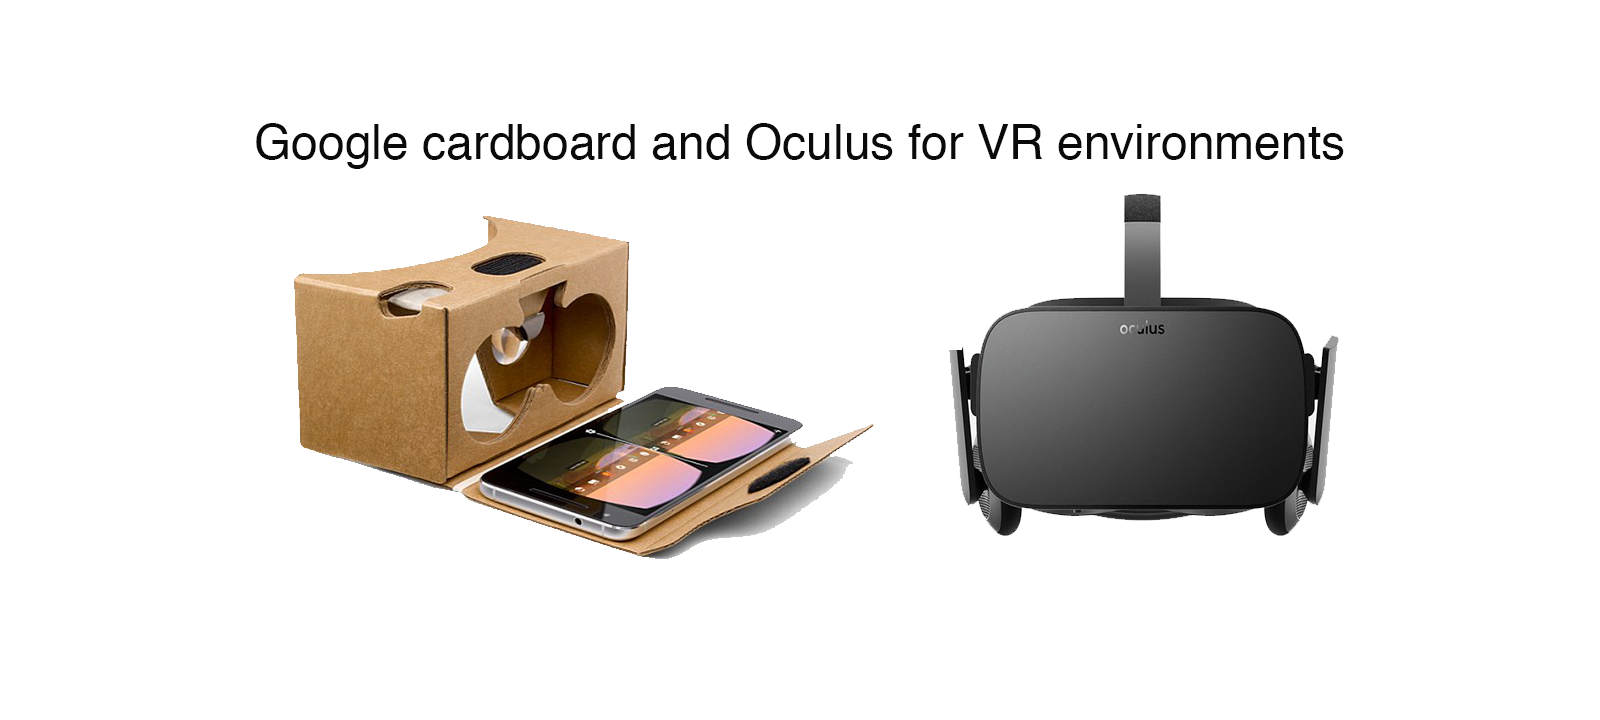 Google cardboard and Oculus rift for virtual reality